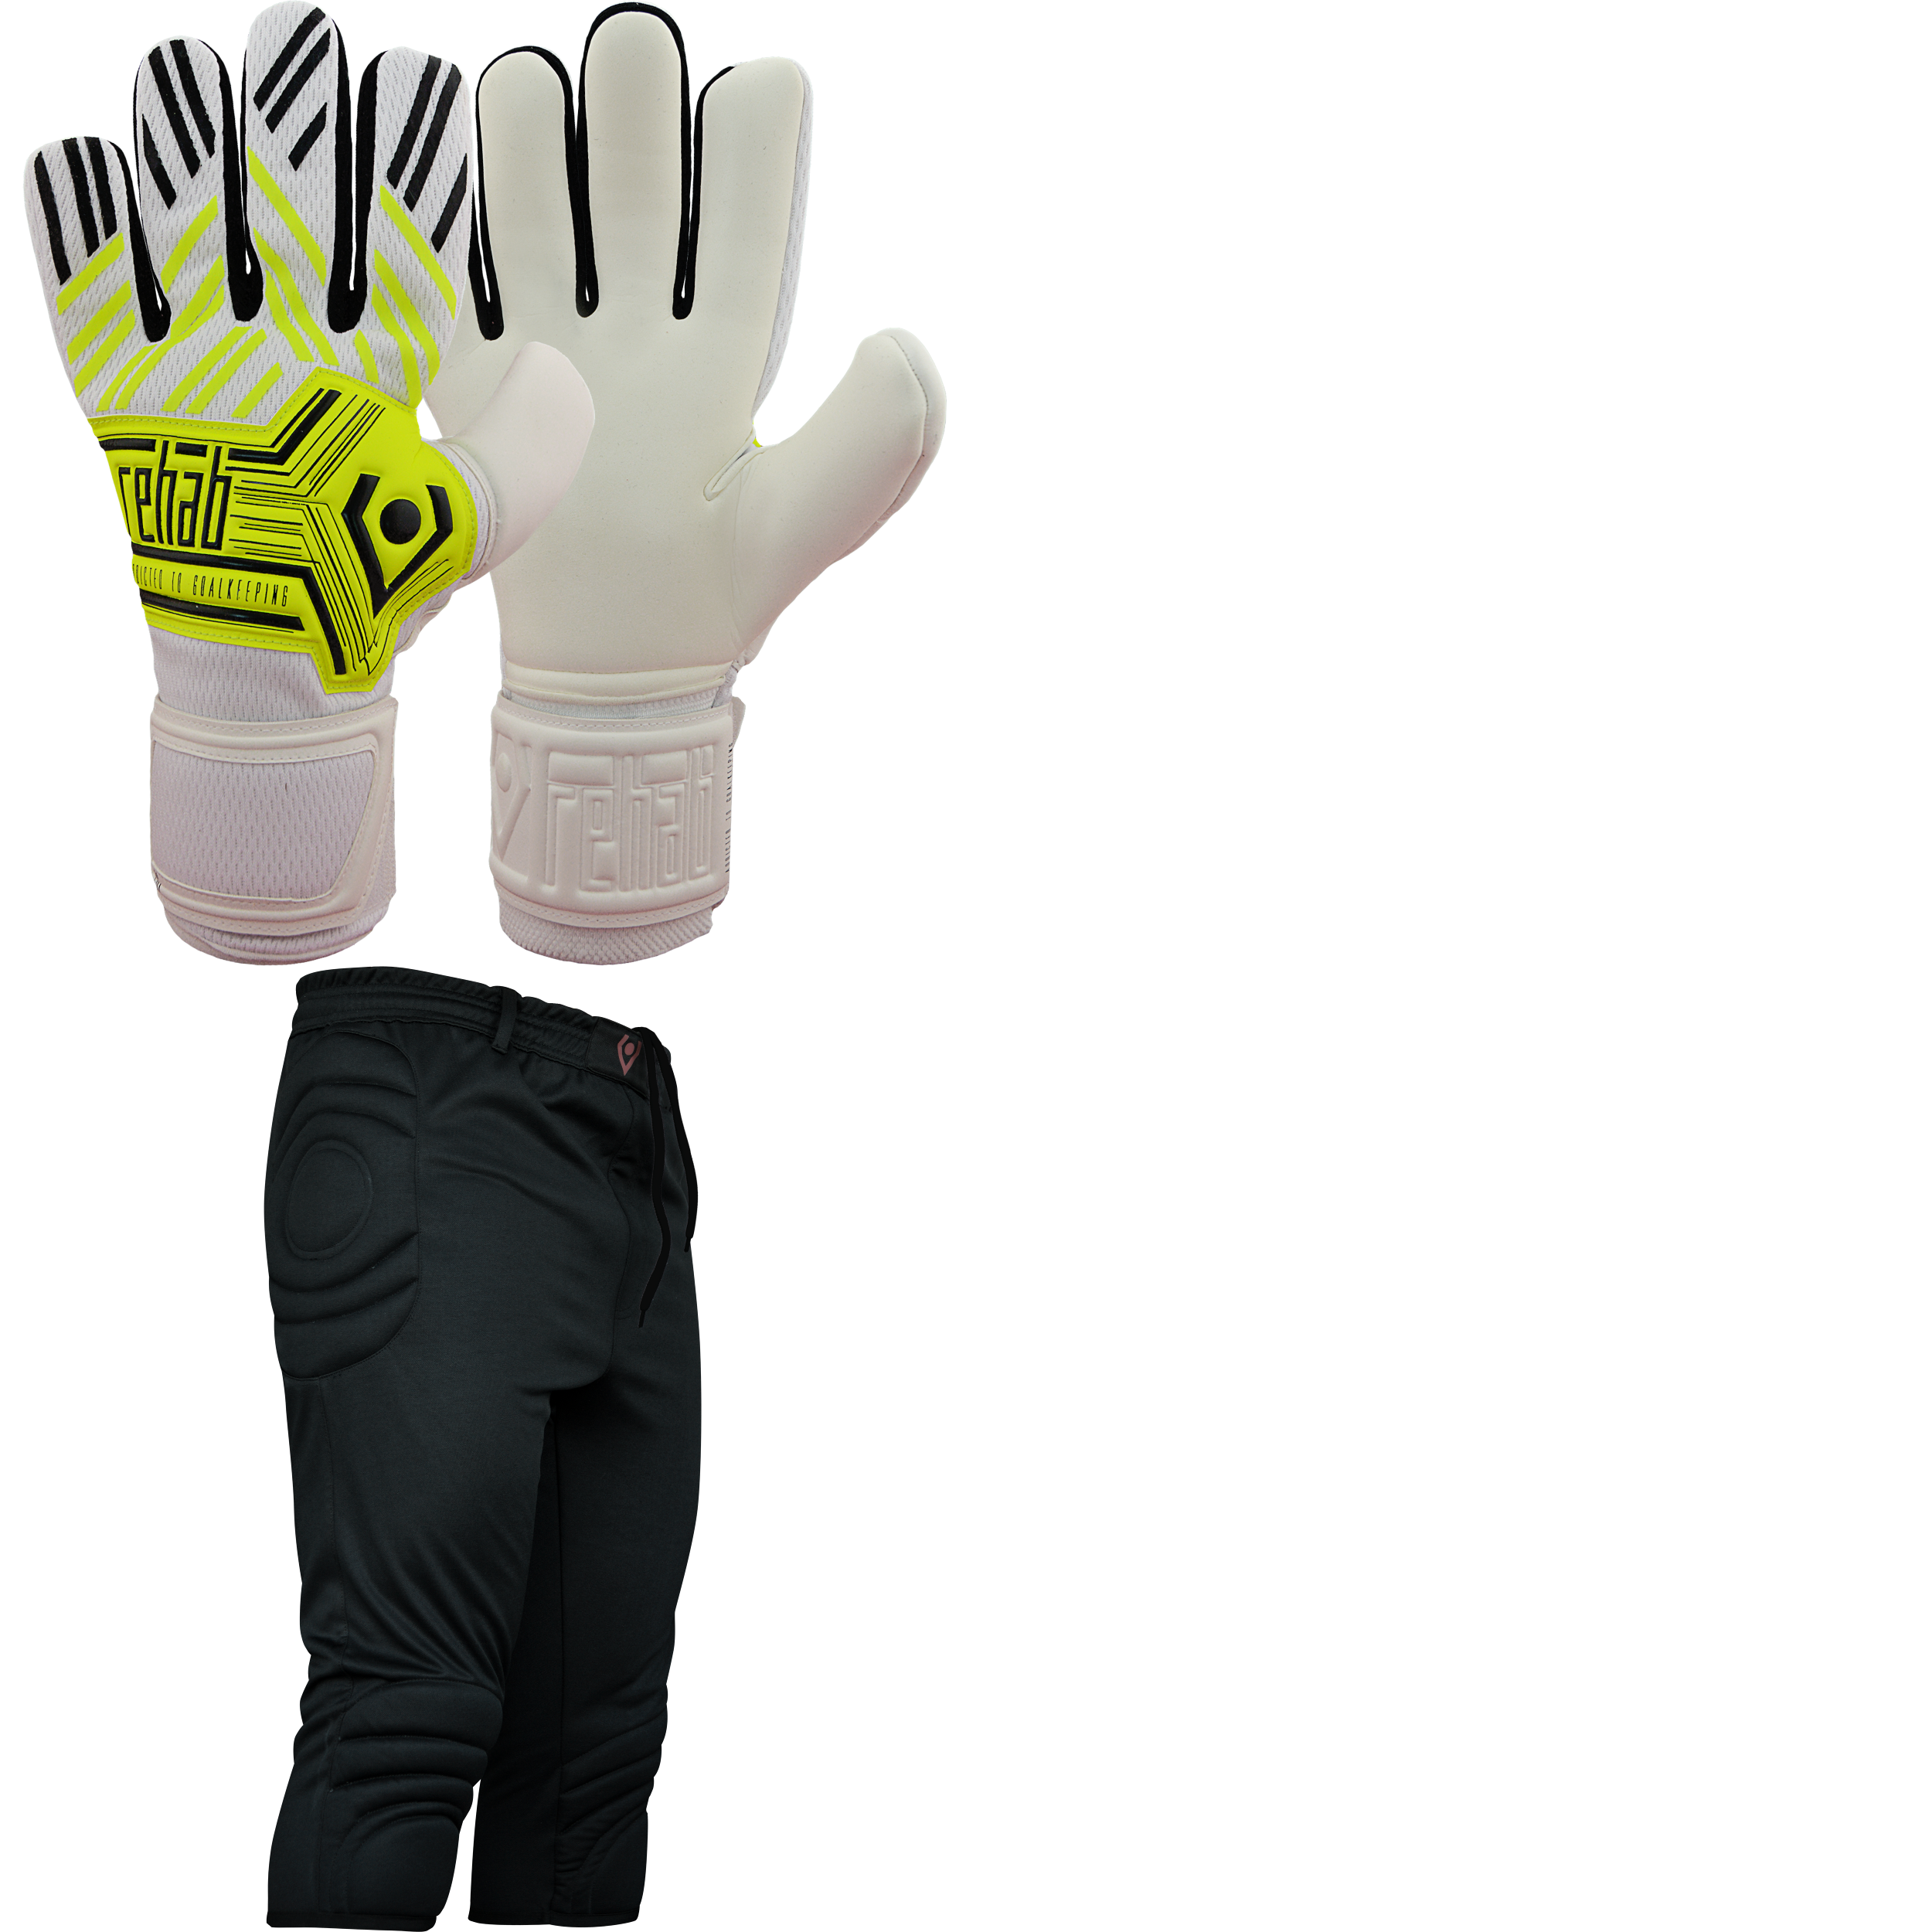 rehab Glove & Pants Double Pack